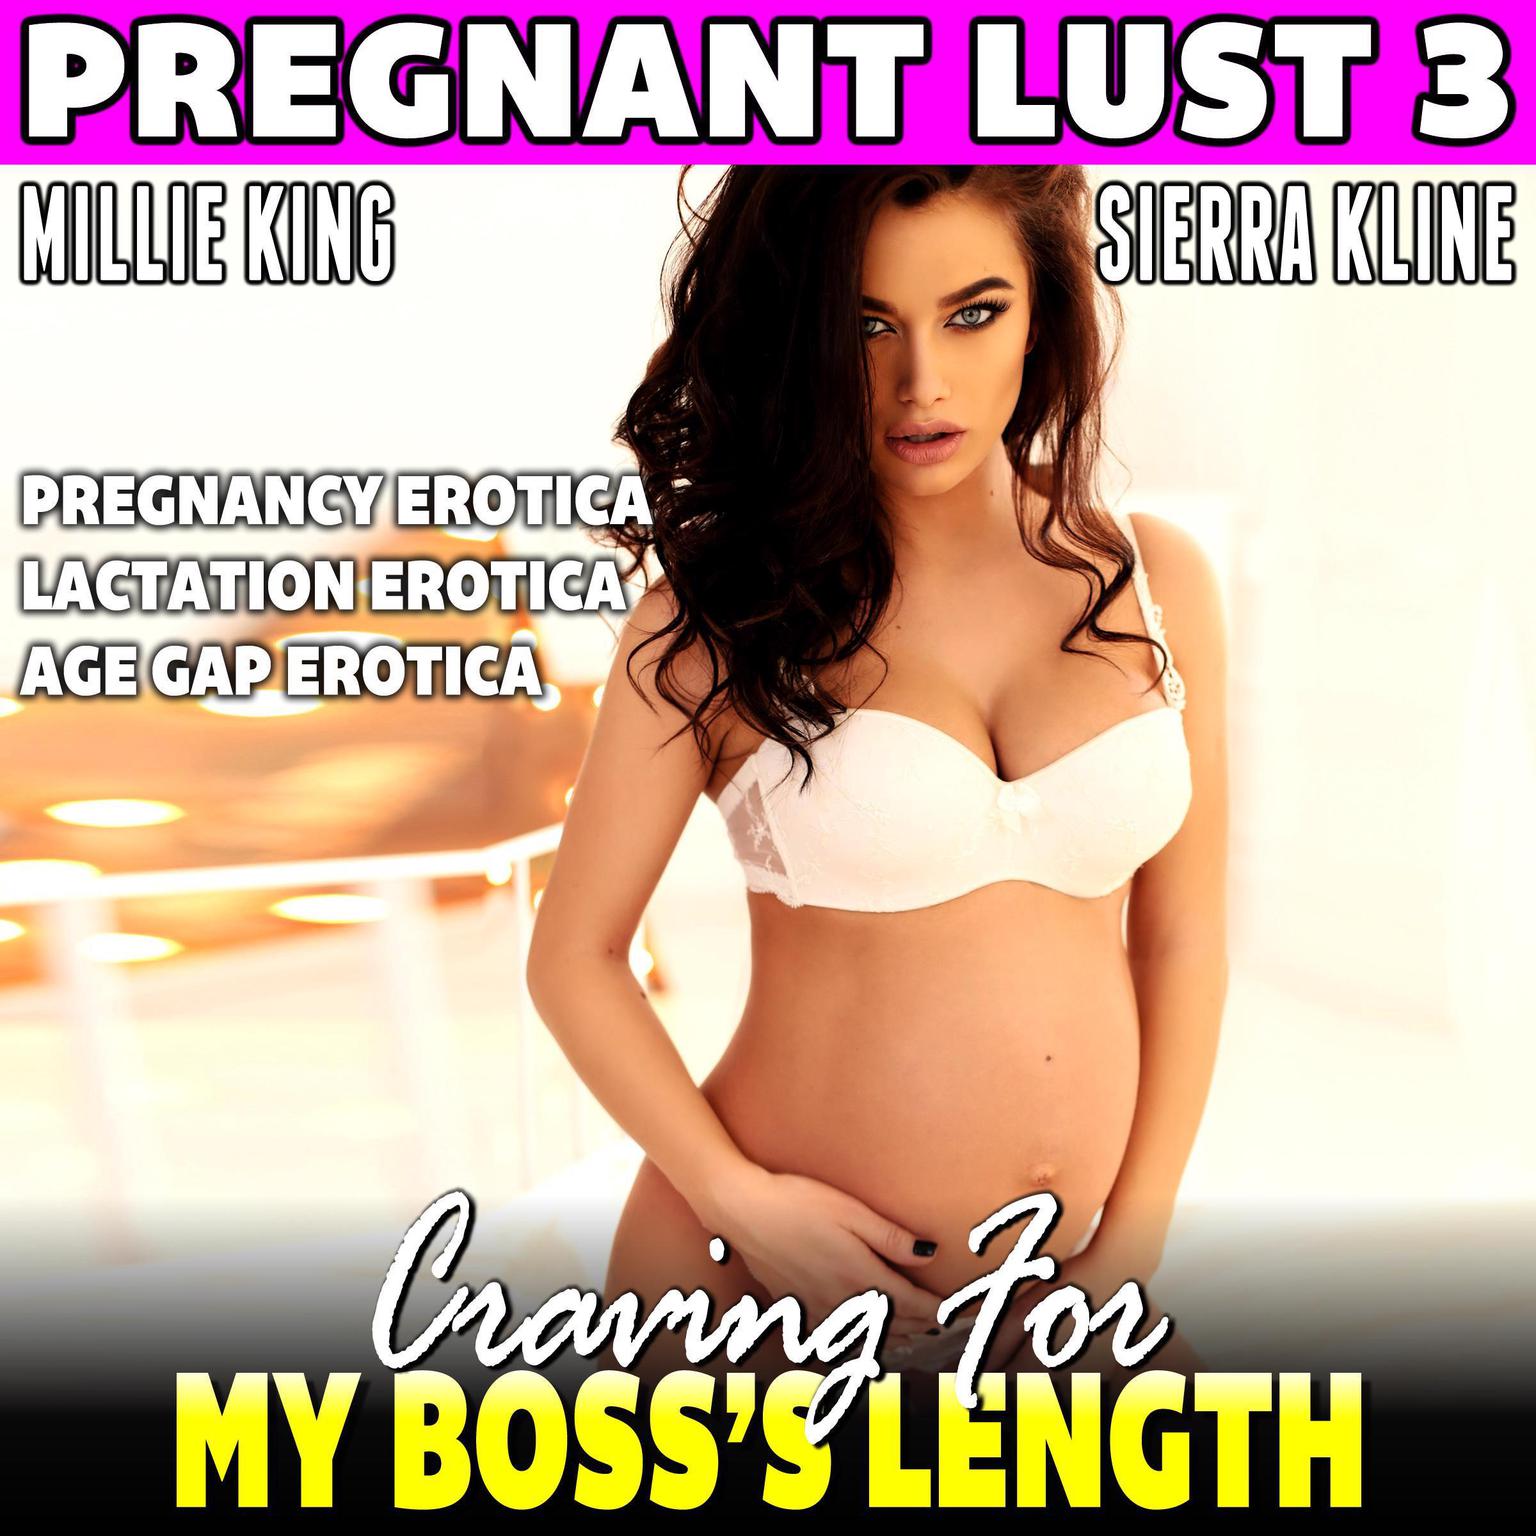 Craving For My Bosss Length : Pregnant Lust 3 (Pregnancy Erotica Lactation Erotica Age Gap Erotica) Audiobook, by Millie King